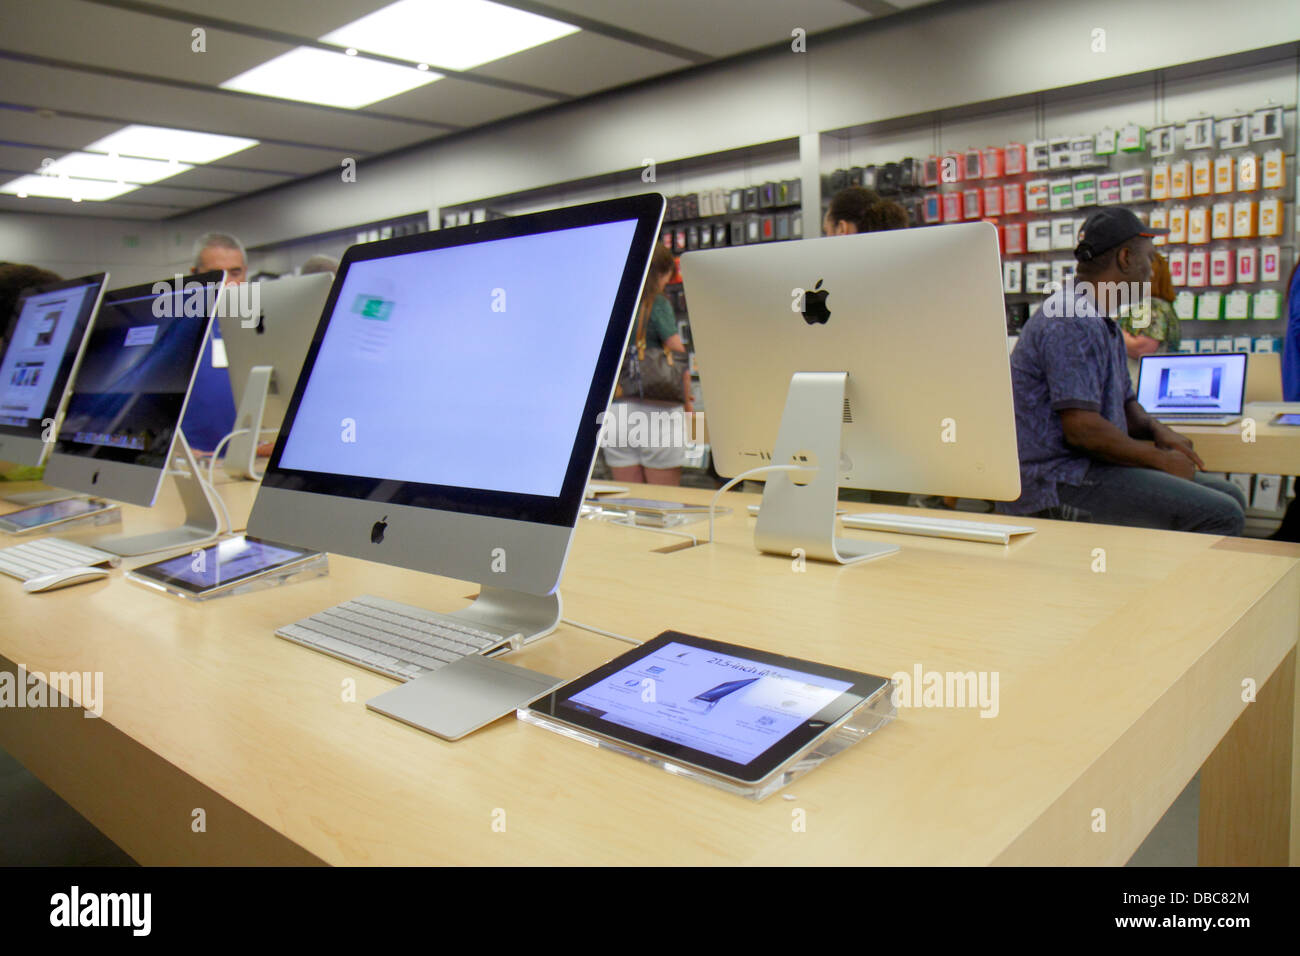 Apple Store, The Galleria, Ft. Lauderdale, FL, Hitting the …